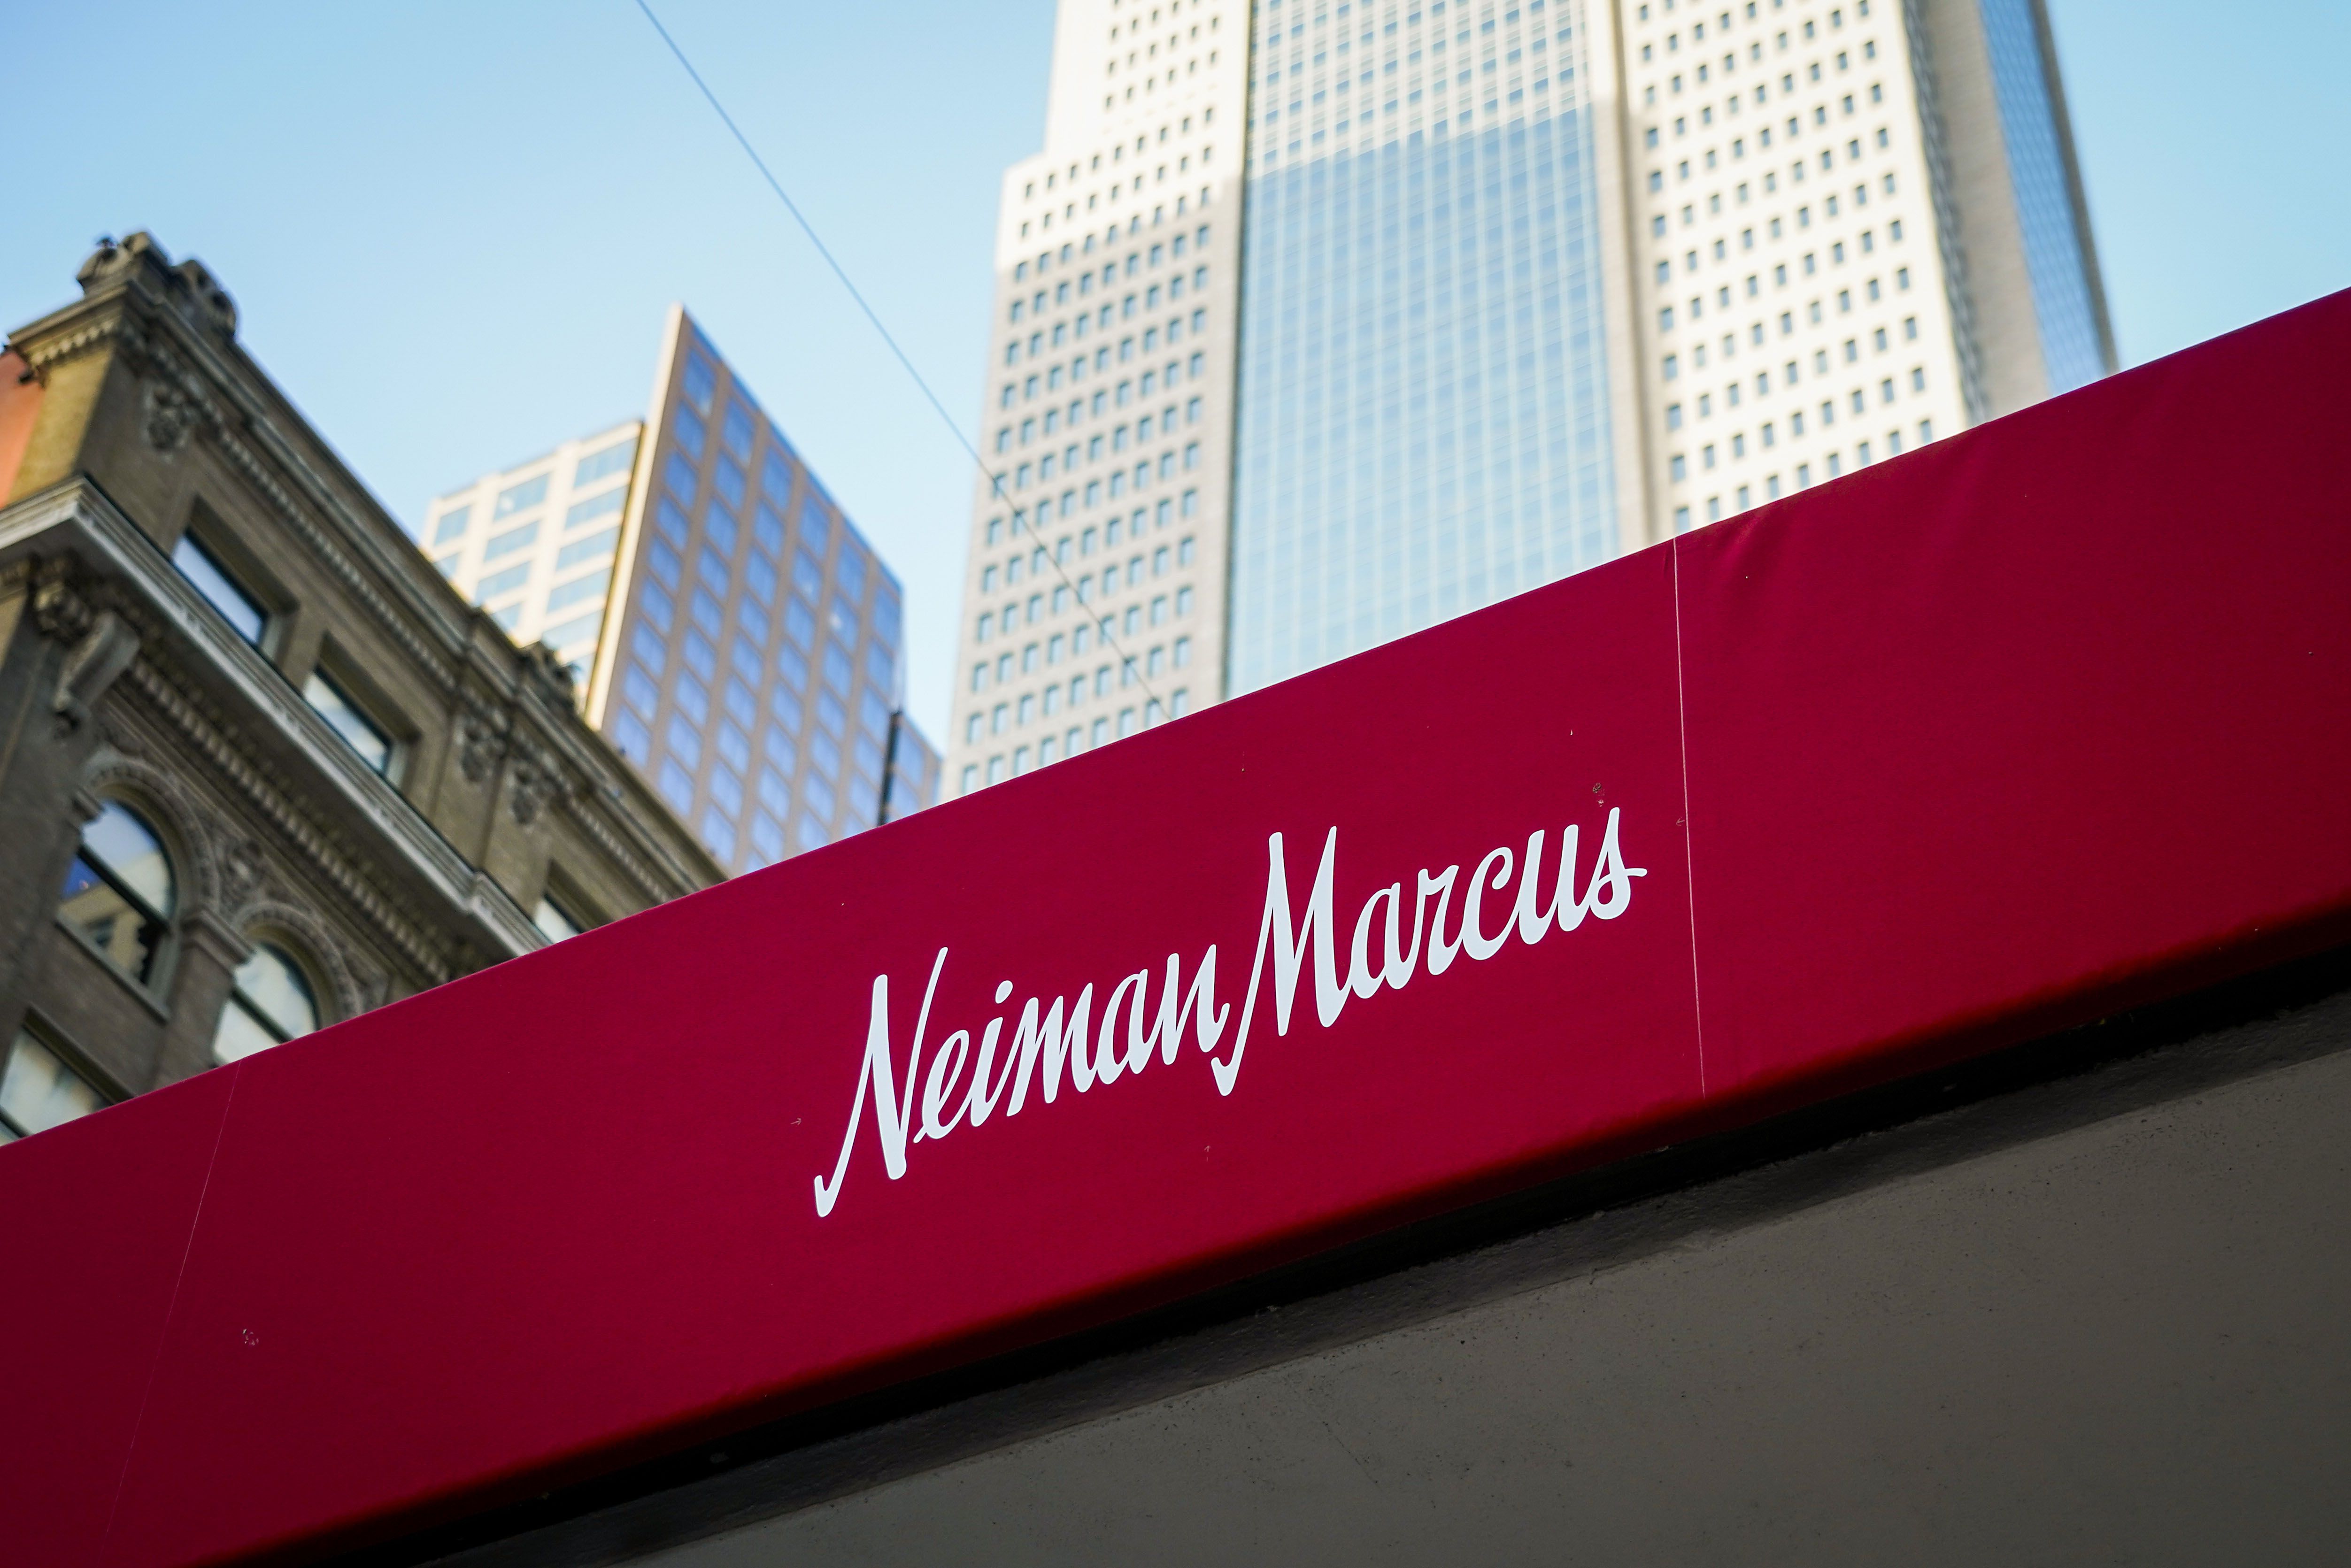 Neiman Marcus Latest To Cut Staff As U.S. Retailers Shed Workforce